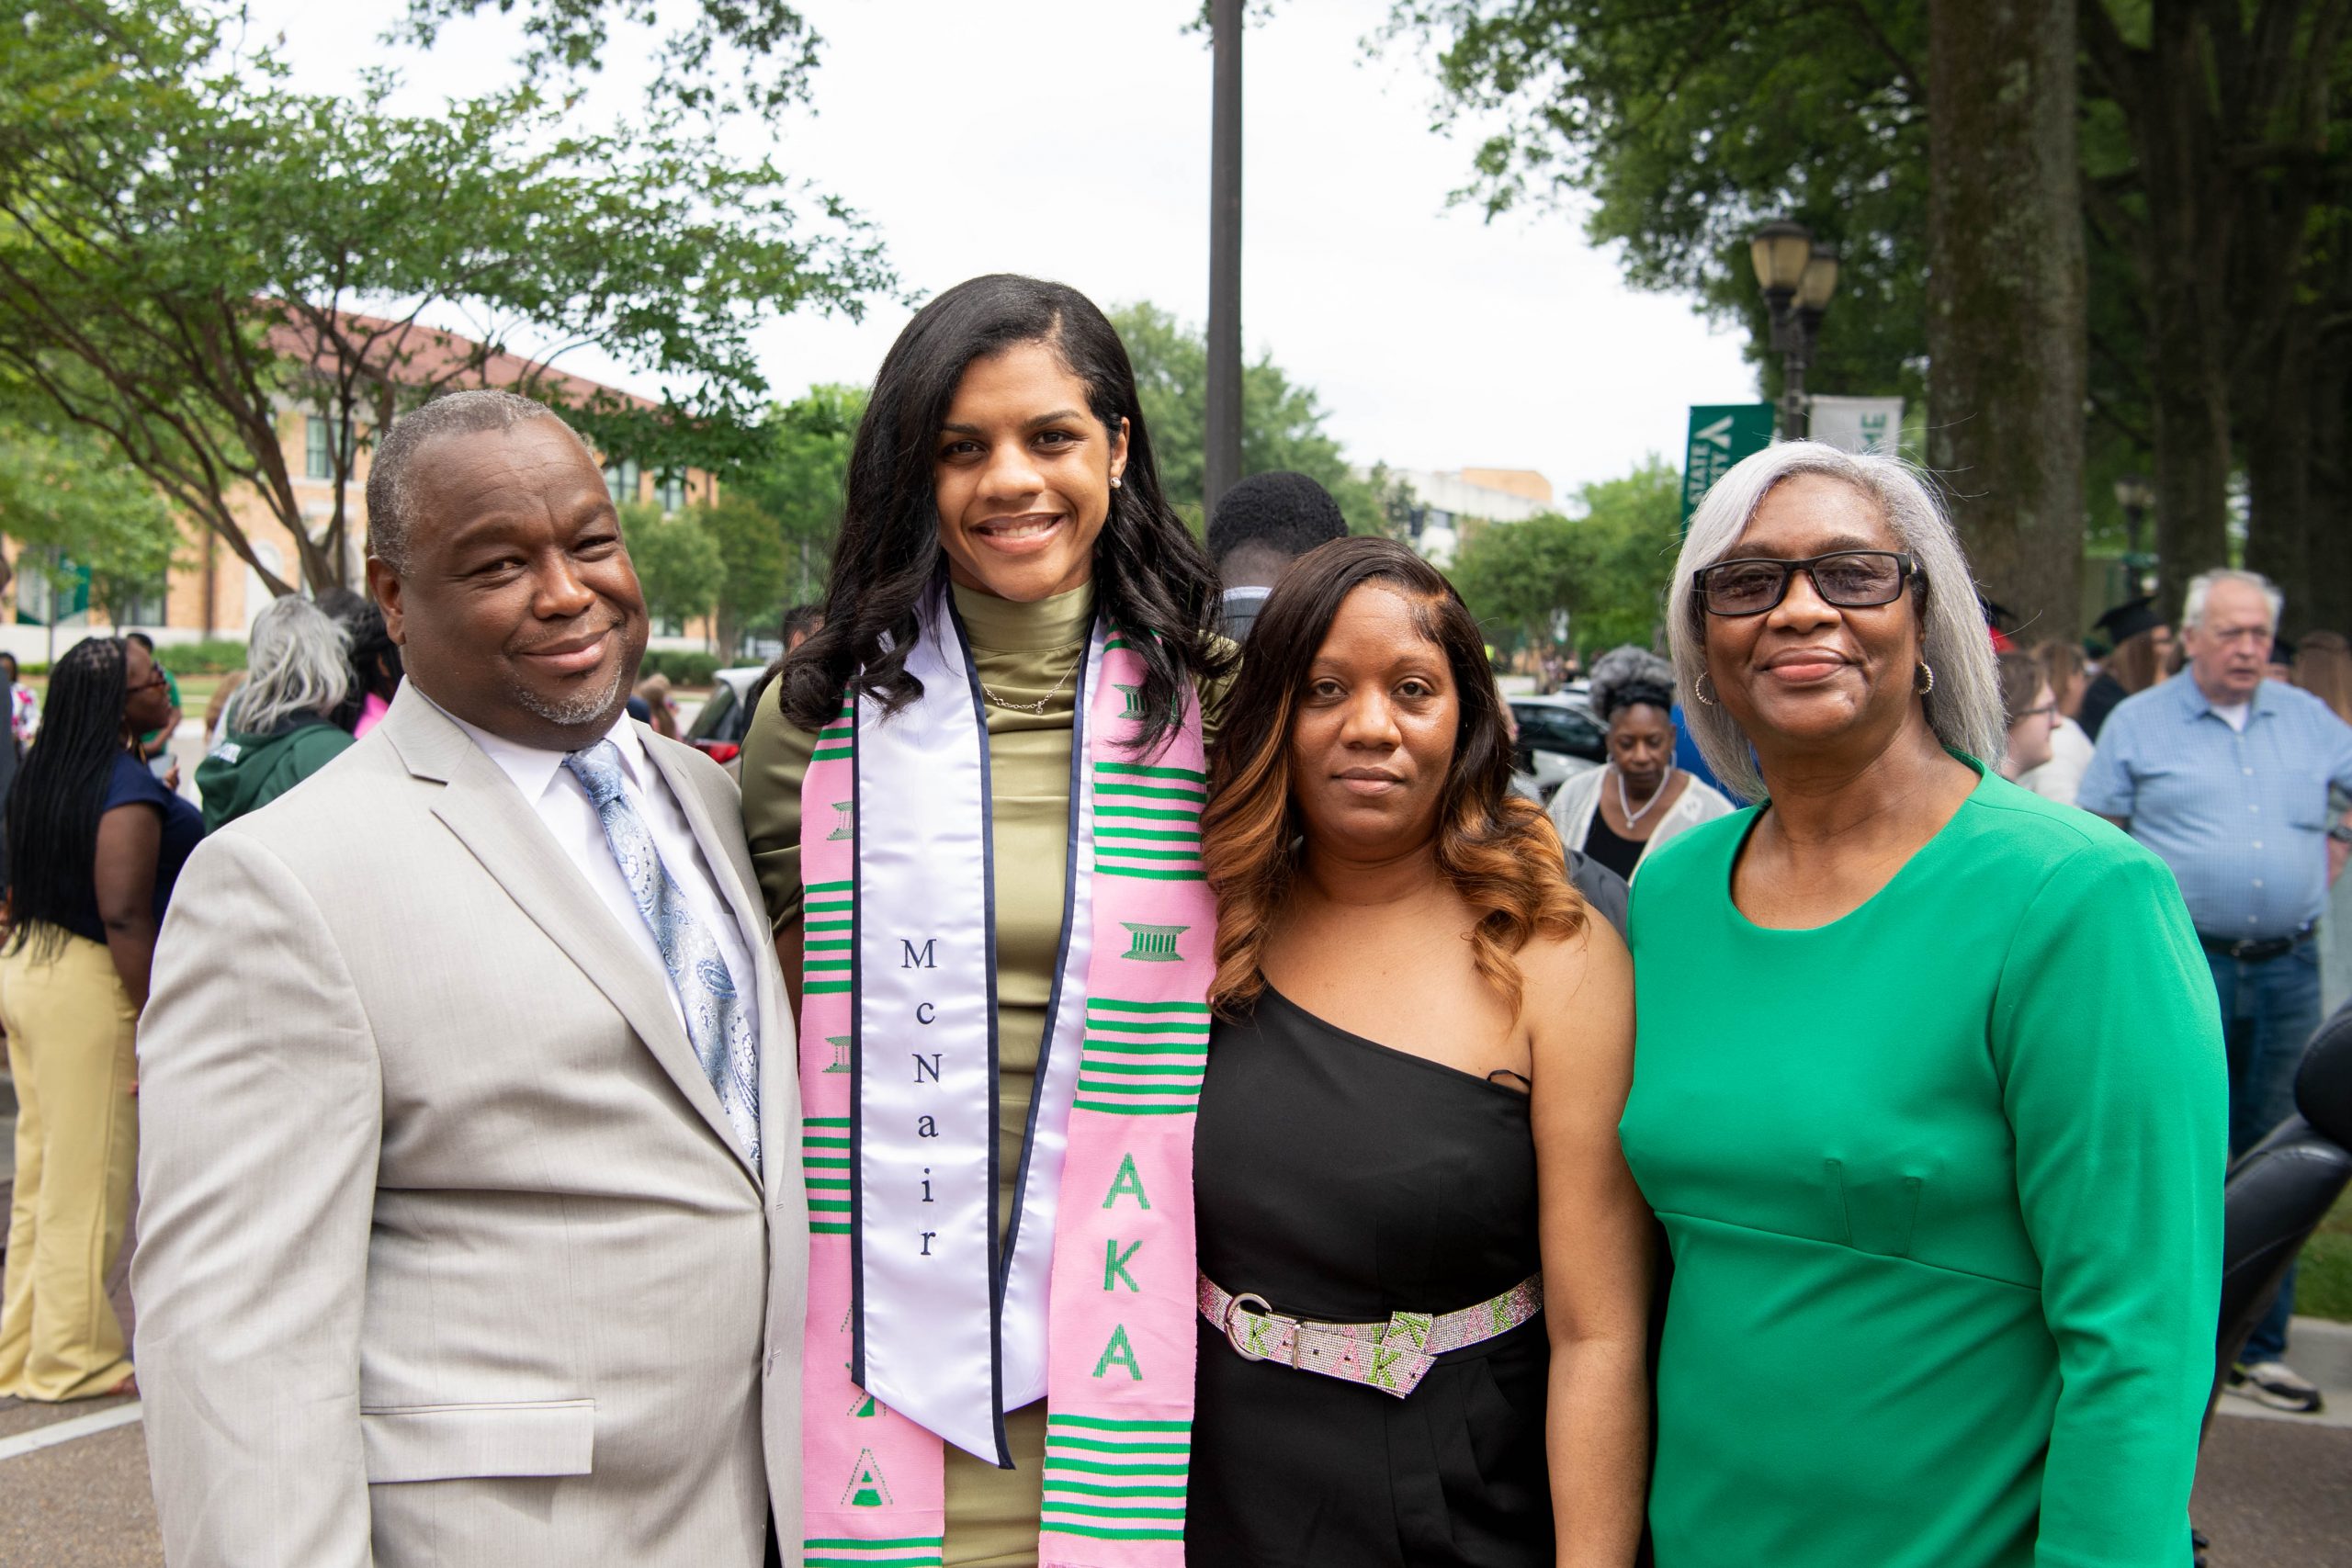 Kye Richardson and her family on her graduation day.